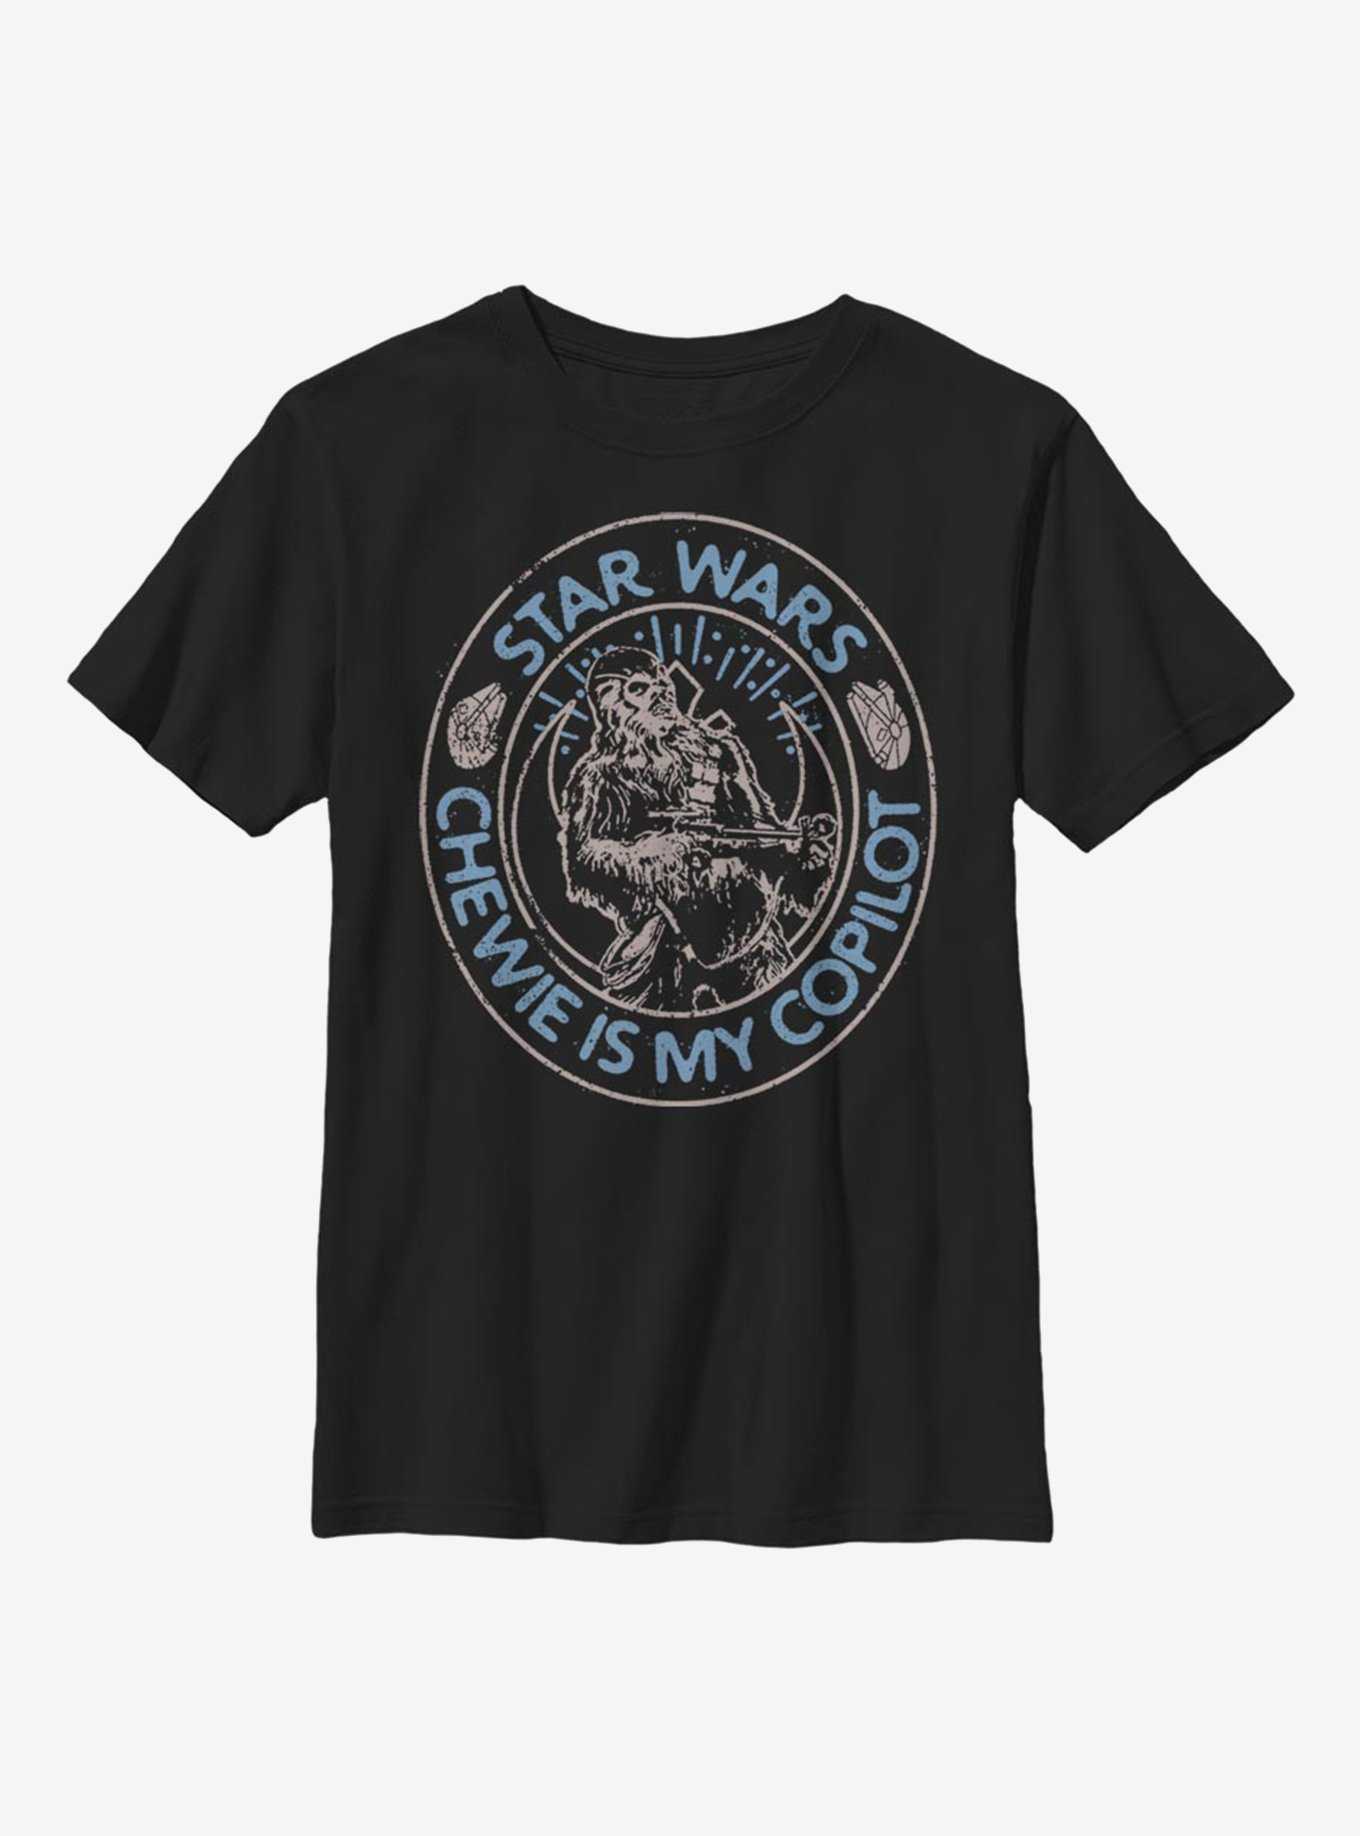 Star Wars Episode IX The Rise Of Skywalker Way of the Wookiee Youth T-Shirt, , hi-res